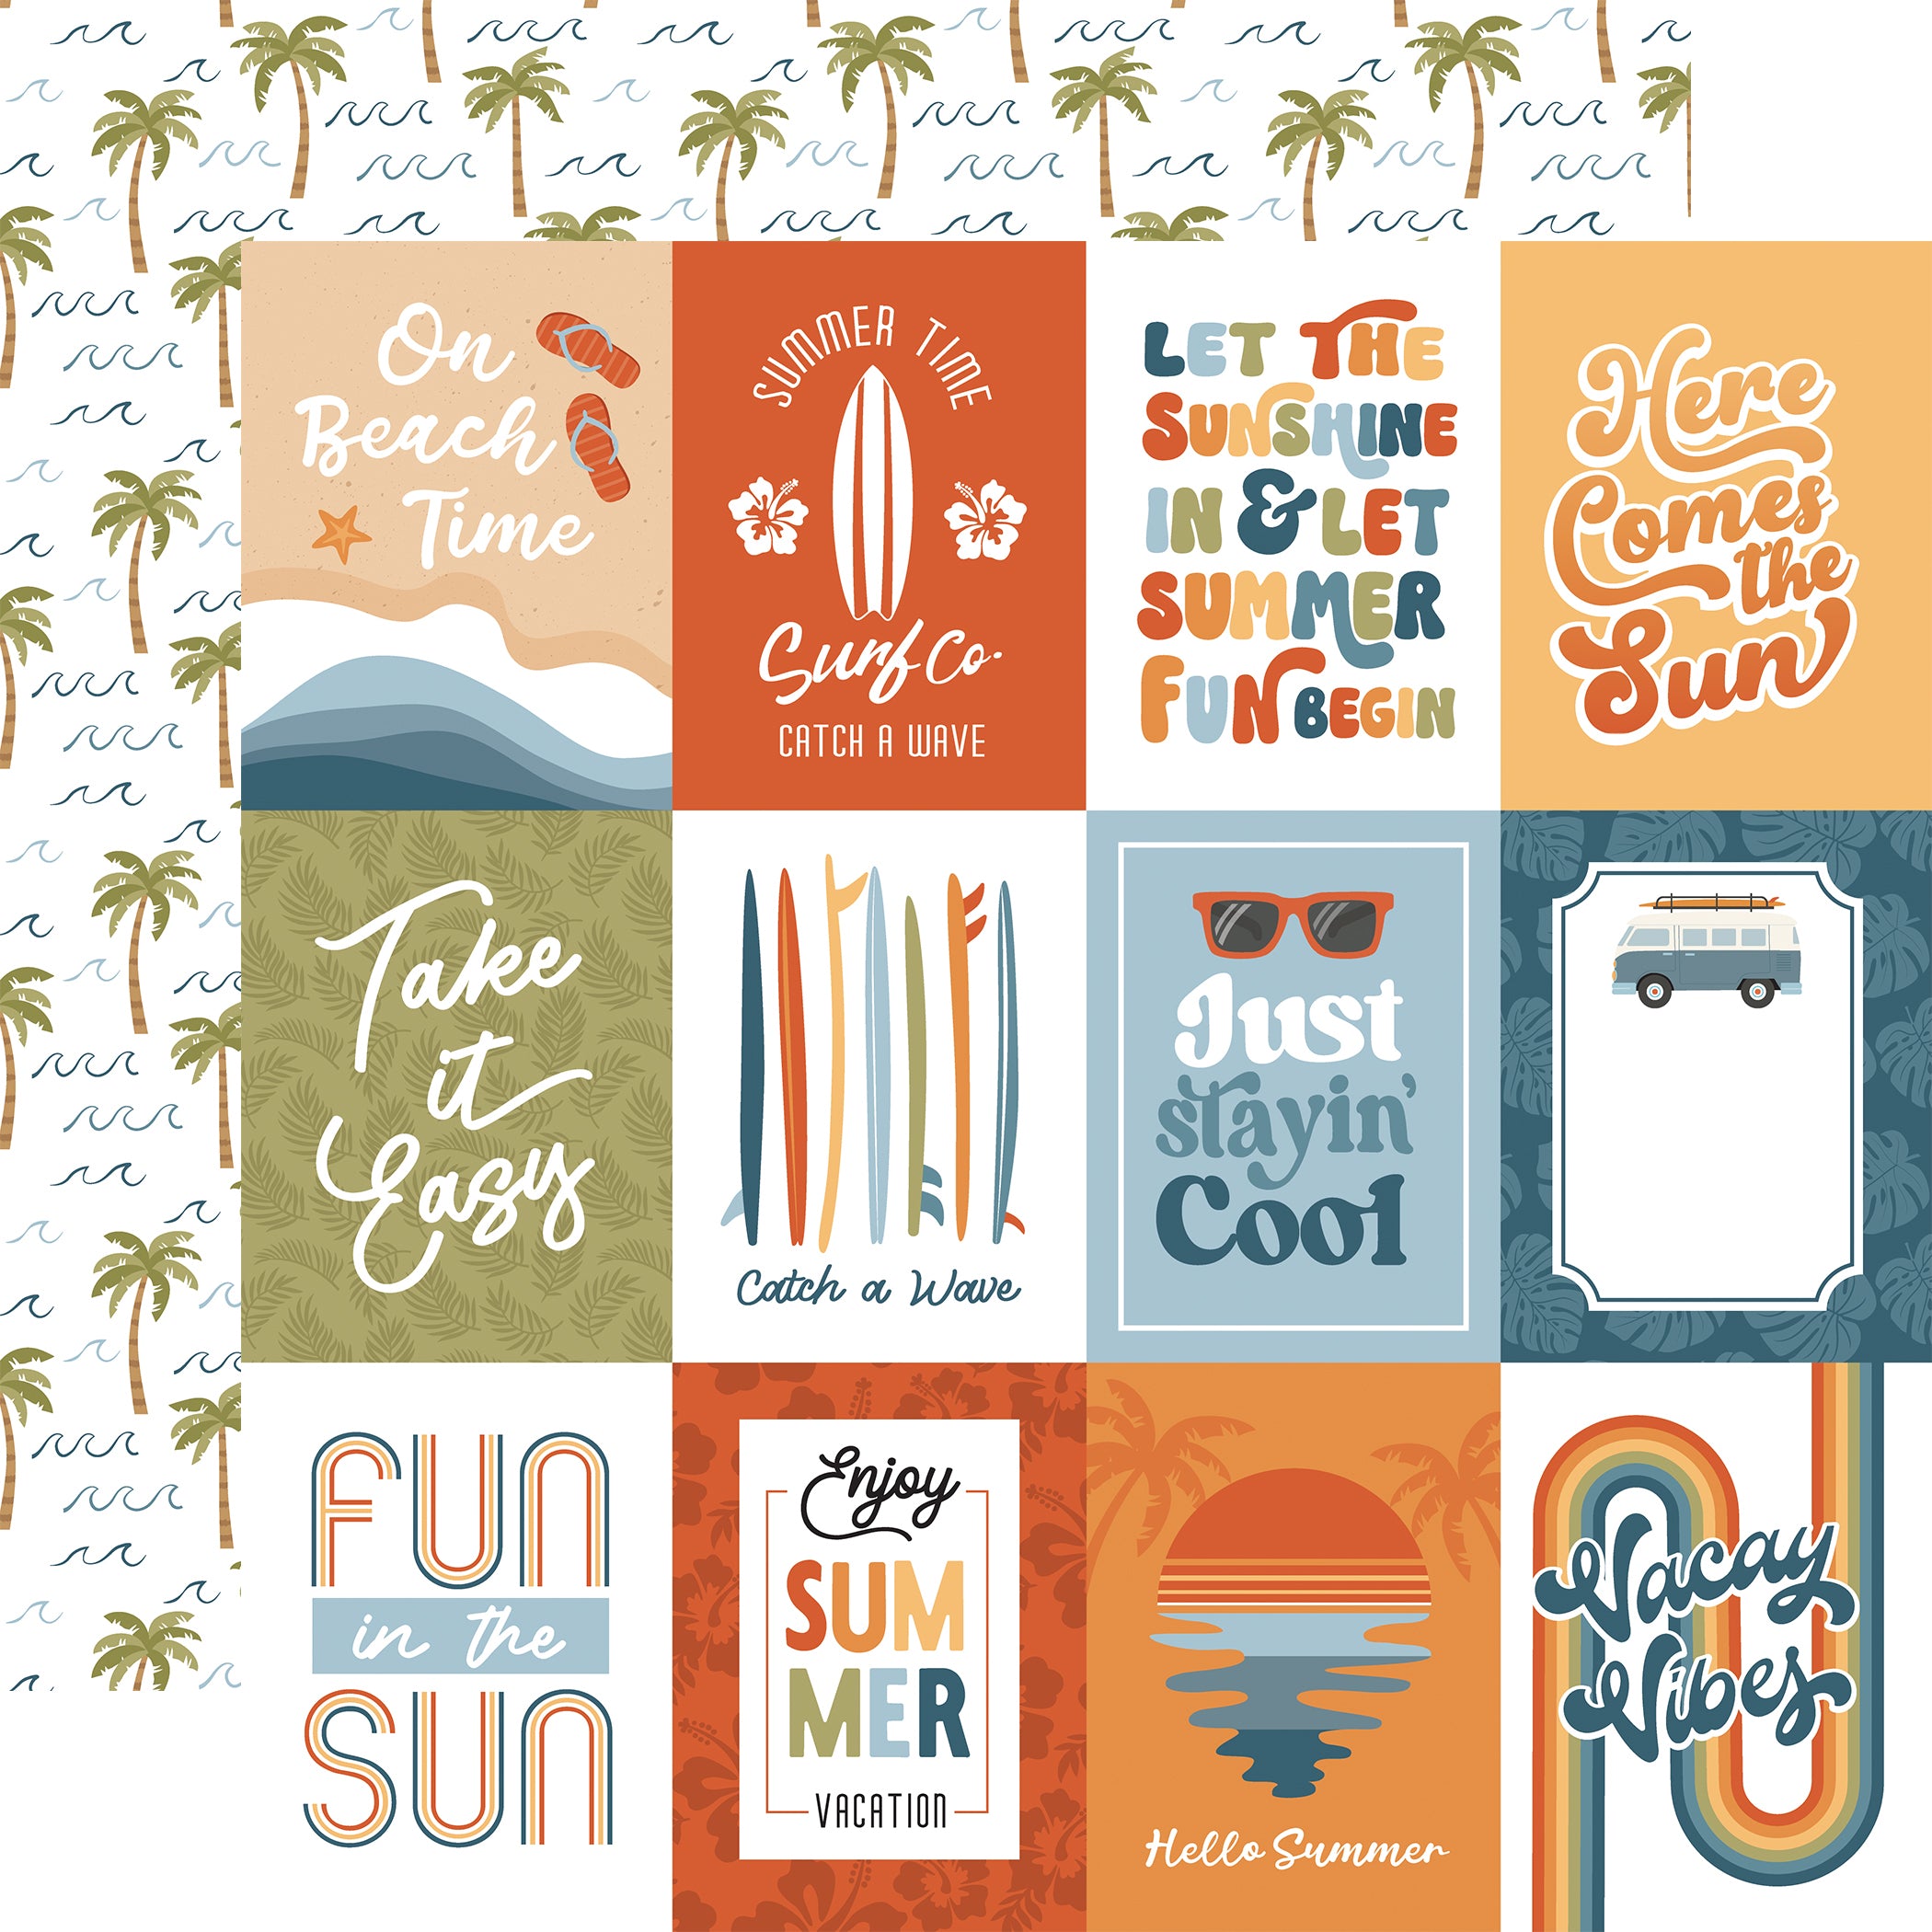 Summer Vibes Collection 12 x 12 Scrapbook Collection Kit by Echo Park Paper